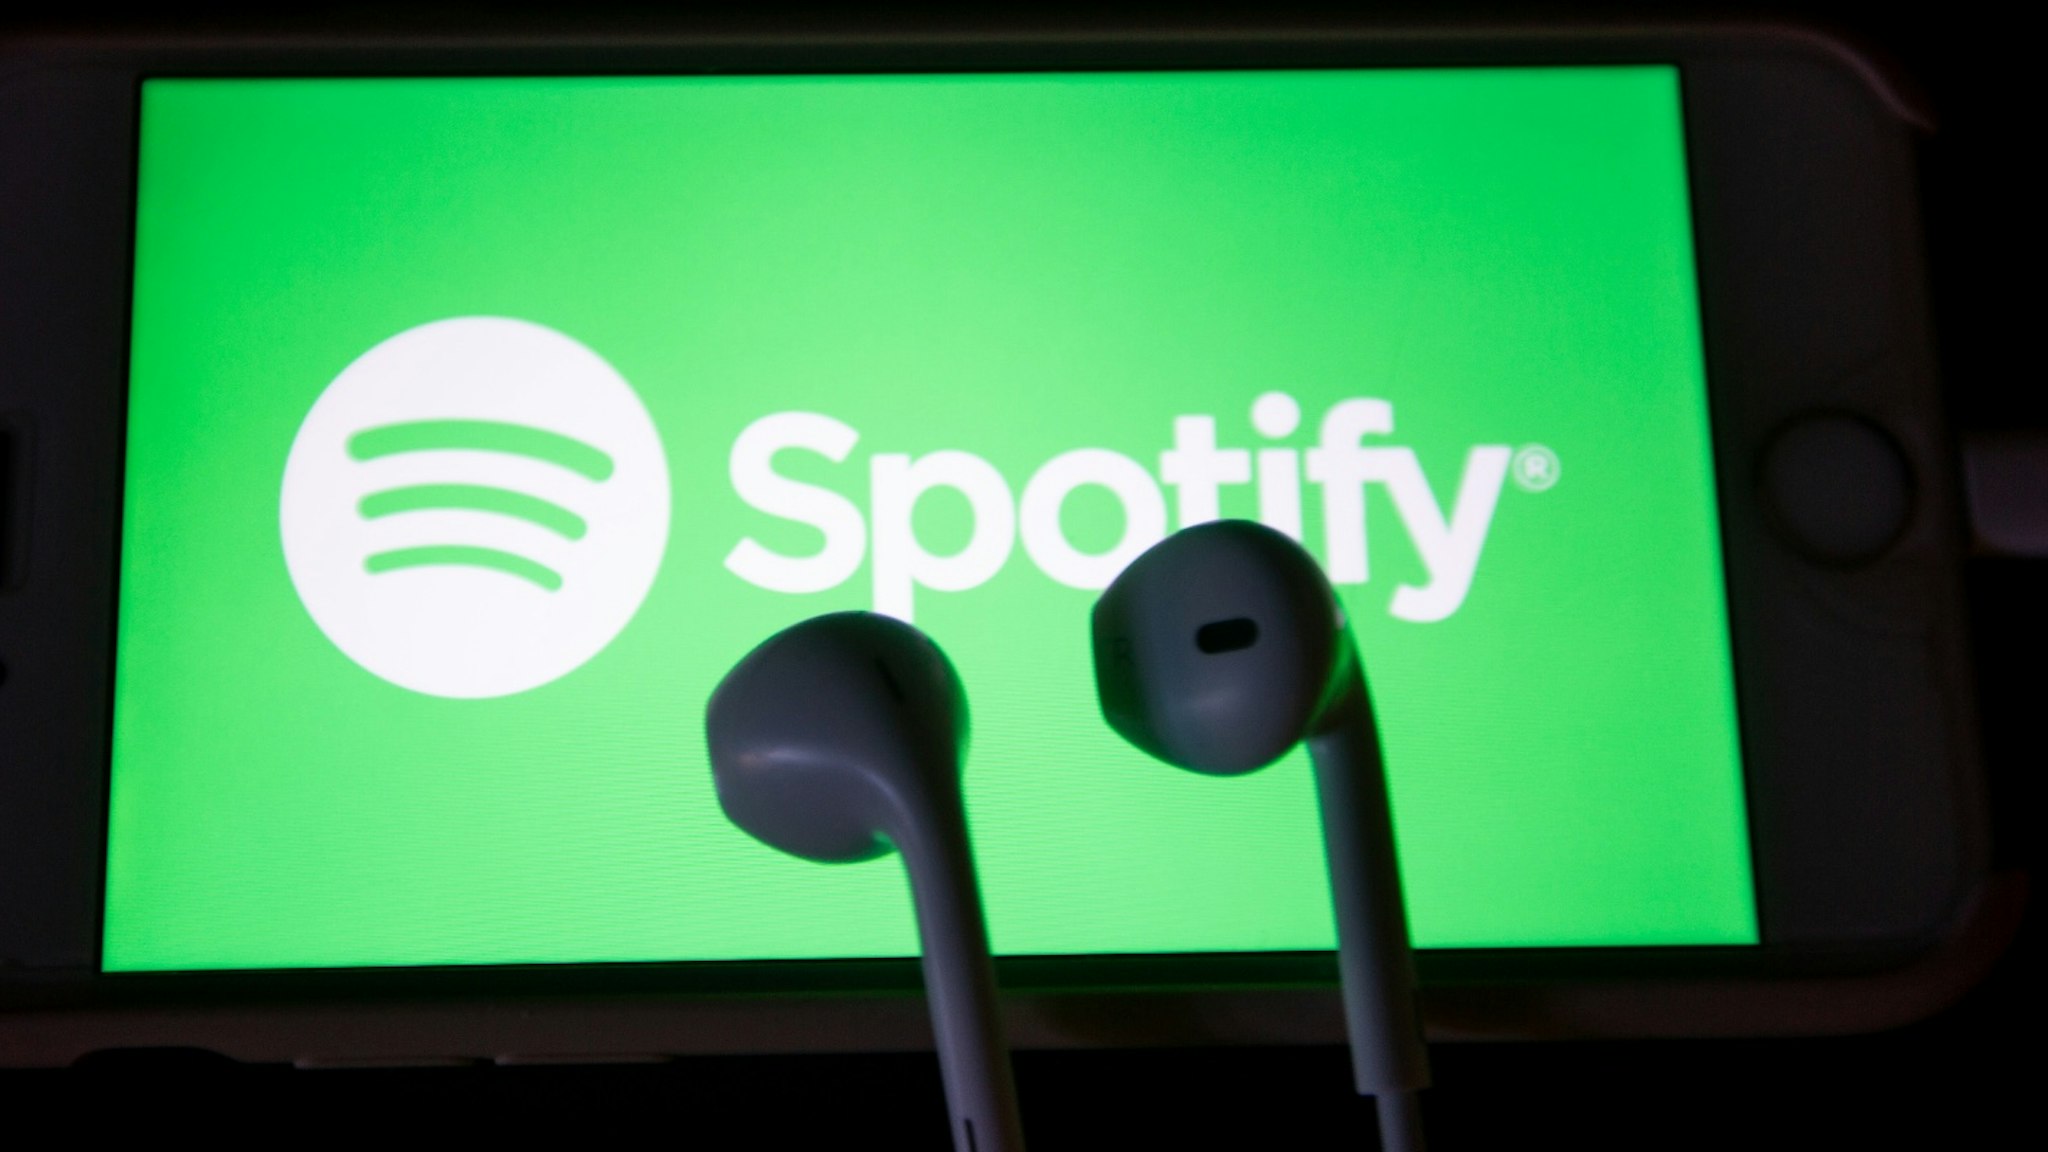 The app of the music streaming app Spotify is seen on a screen while some headphones are lying on it.